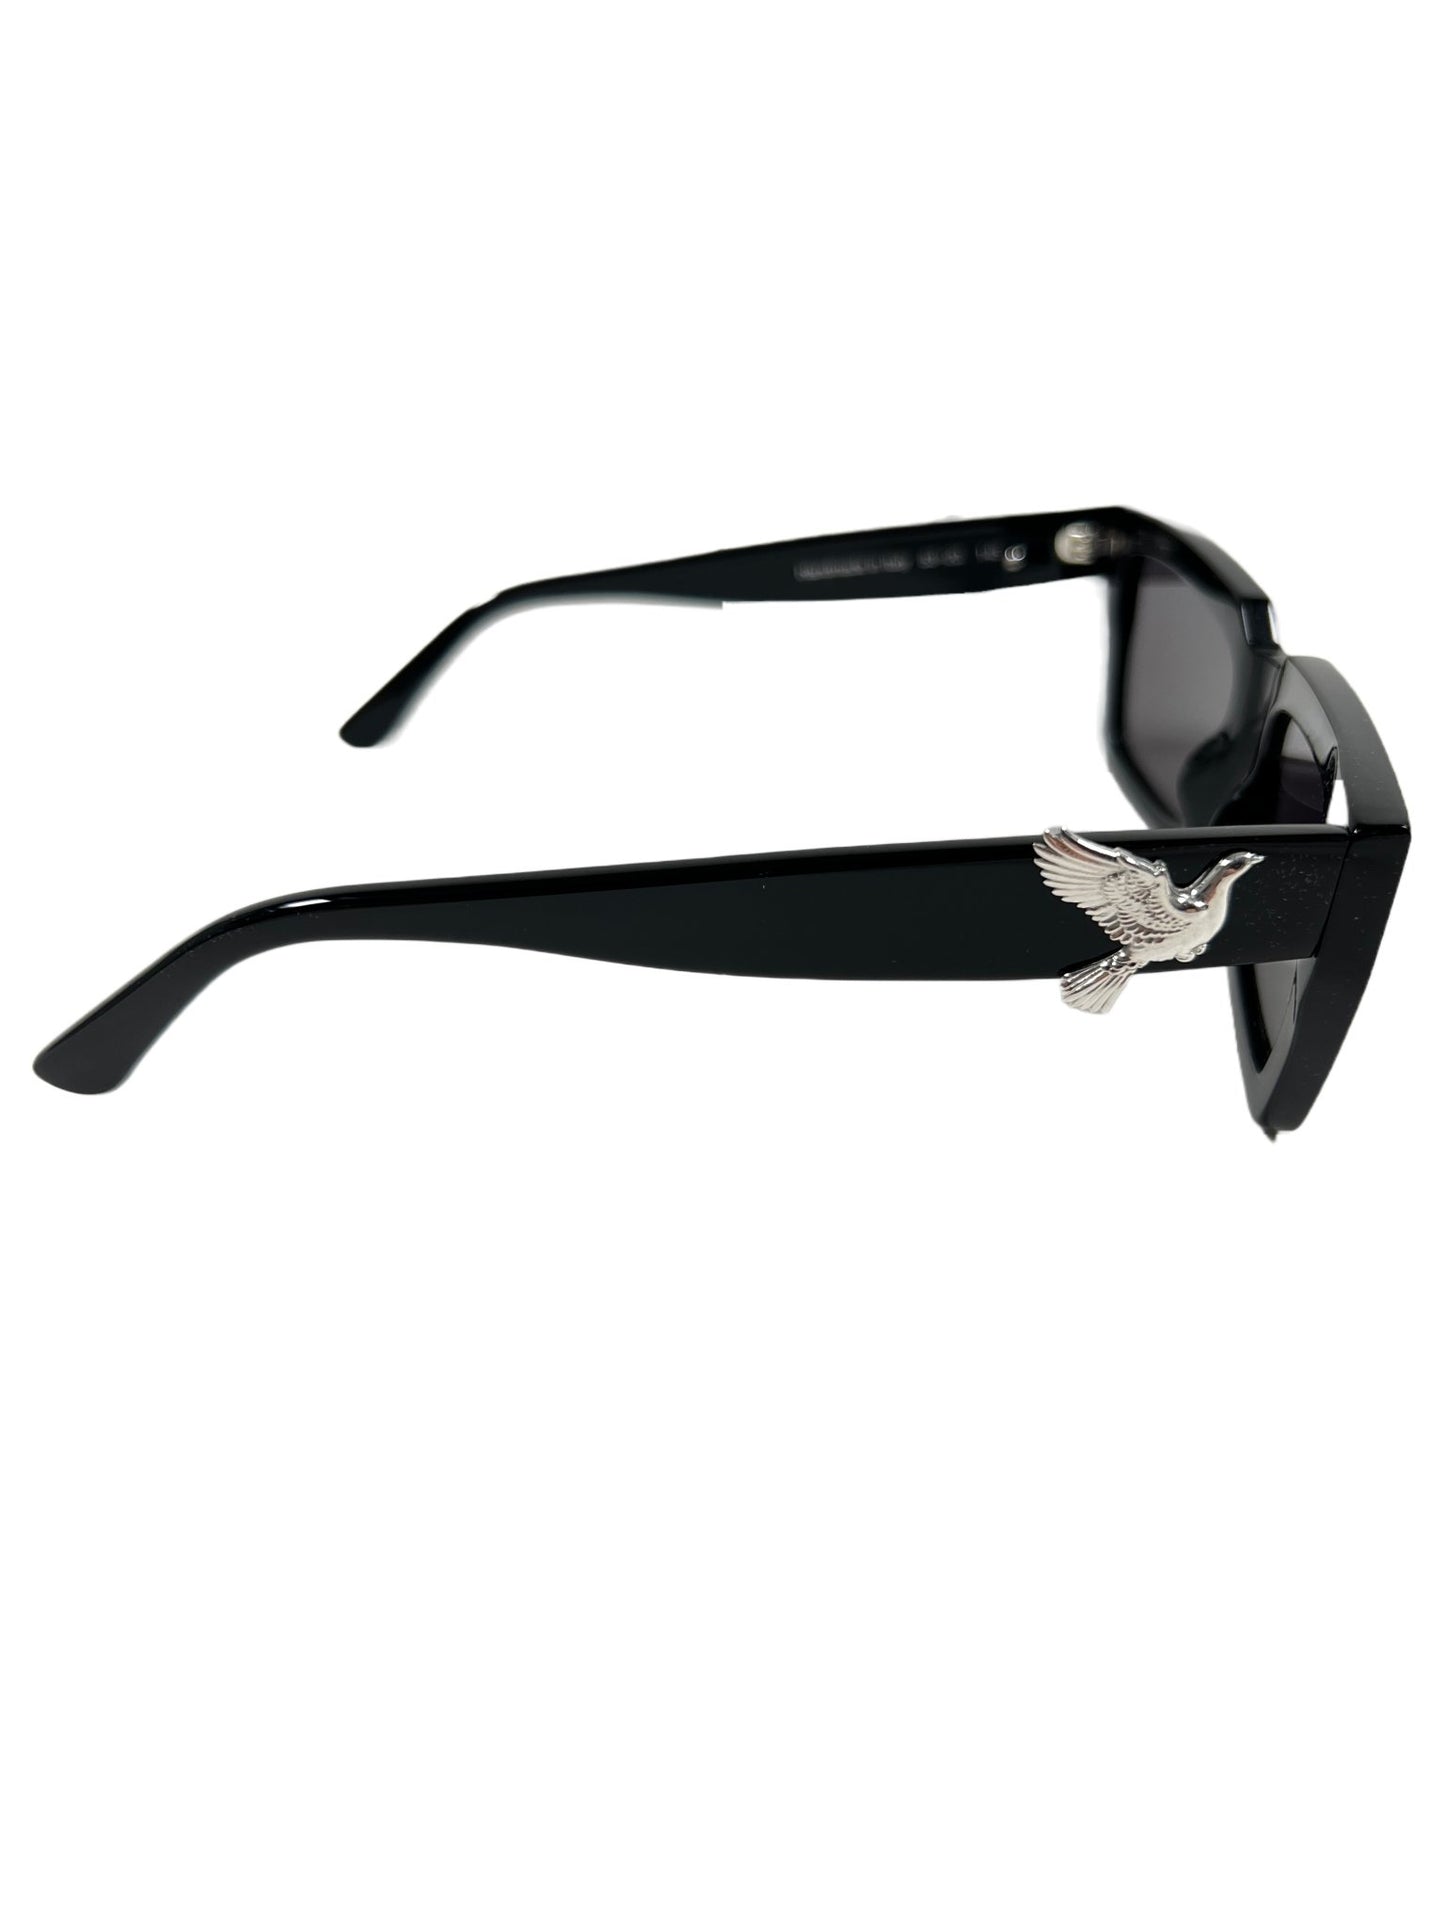 A pair of high-quality 3.PARADIS FLYING DOVE sunglasses, made in Italy.